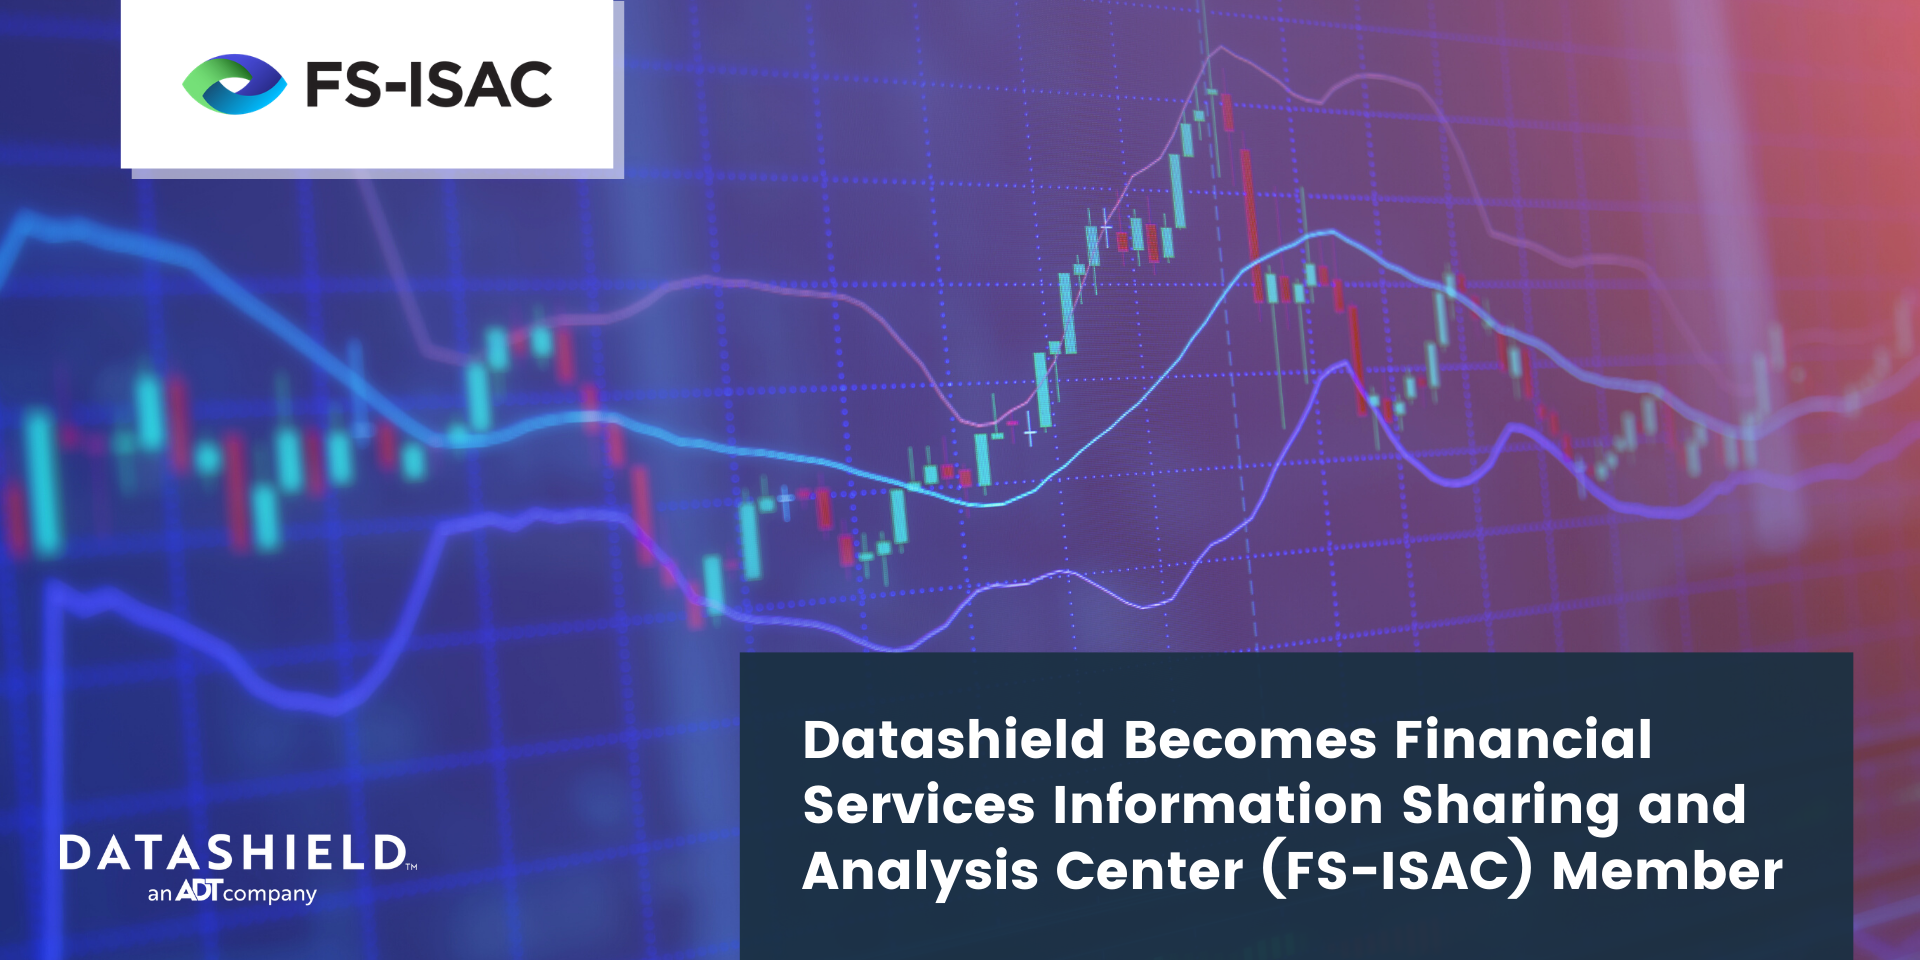 Datashield Becomes Financial Services Information Sharing and Analysis Center (FS-ISAC) Member (1)